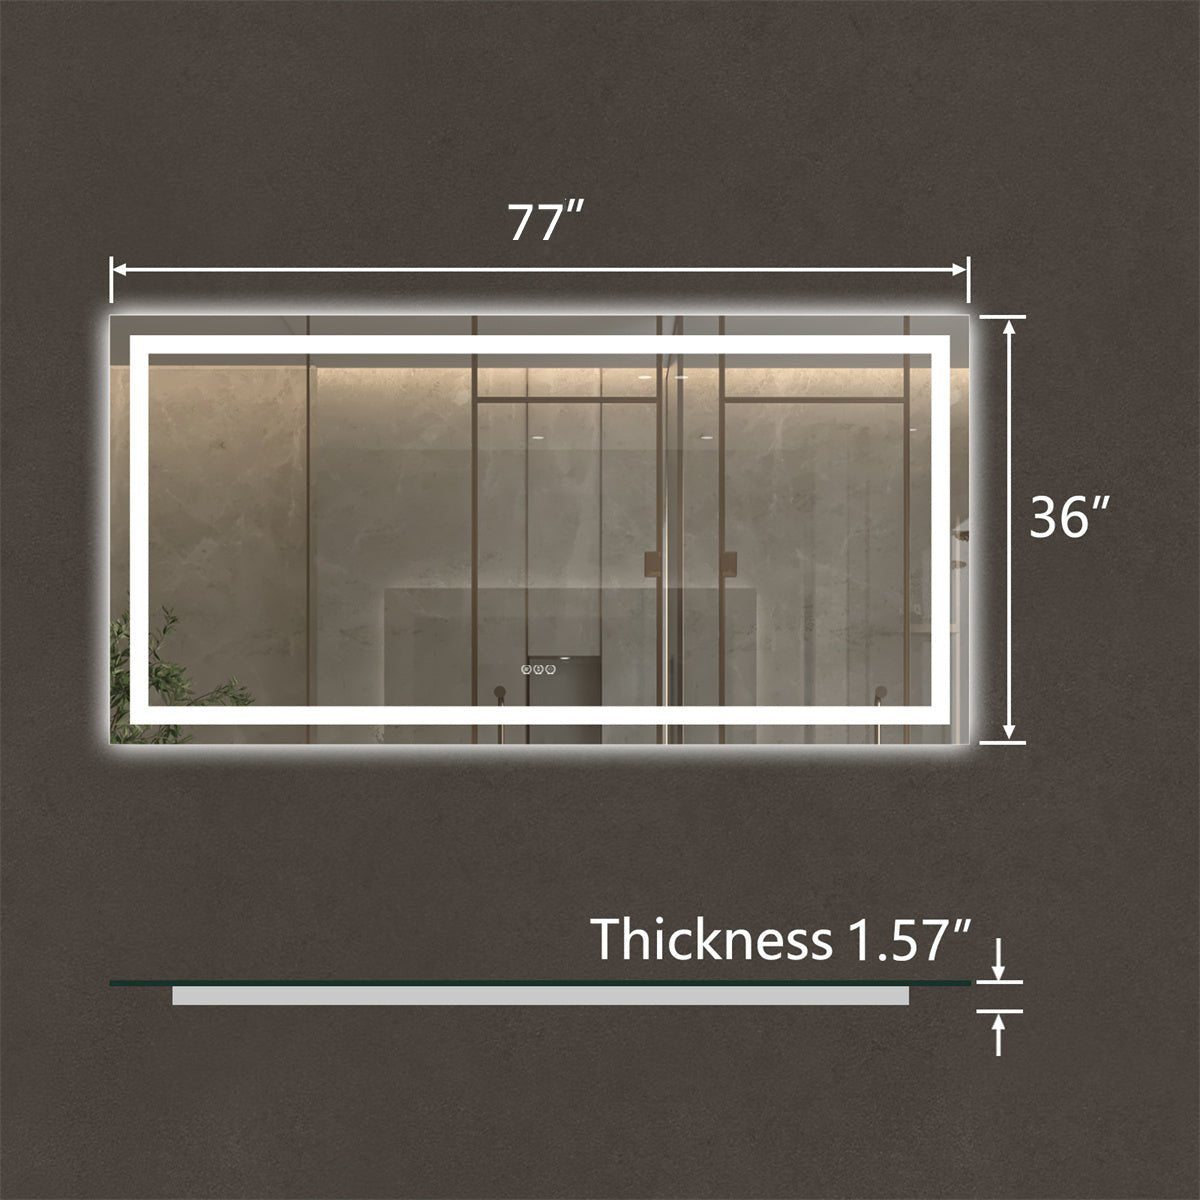 Apex 77" W x 36" H LED Bathroom Large Light Led Mirror,Anti Fog,Dimmable,Dual Lighting Mode,Tempered Glass